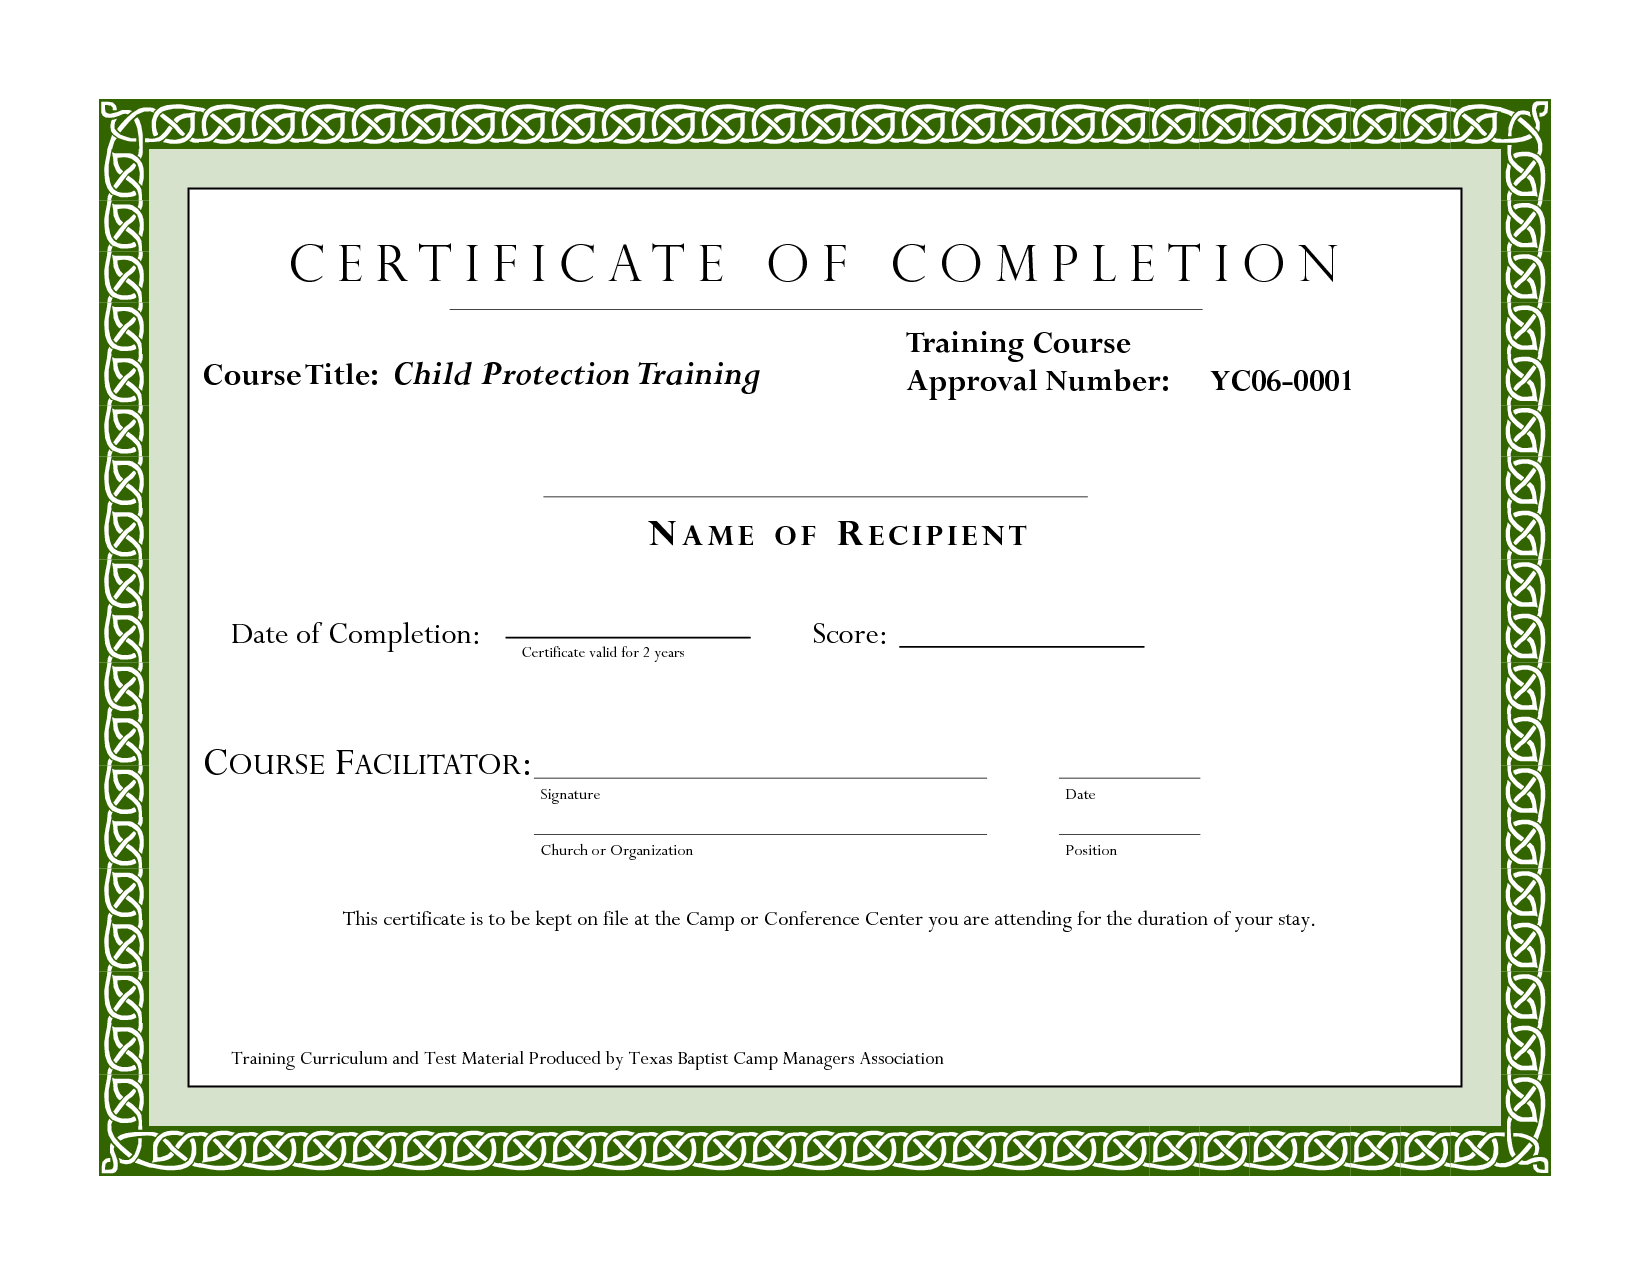 005 Certificate Of Completion Template Fantastic Ideas Regarding Certificate Of Completion Free Template Word